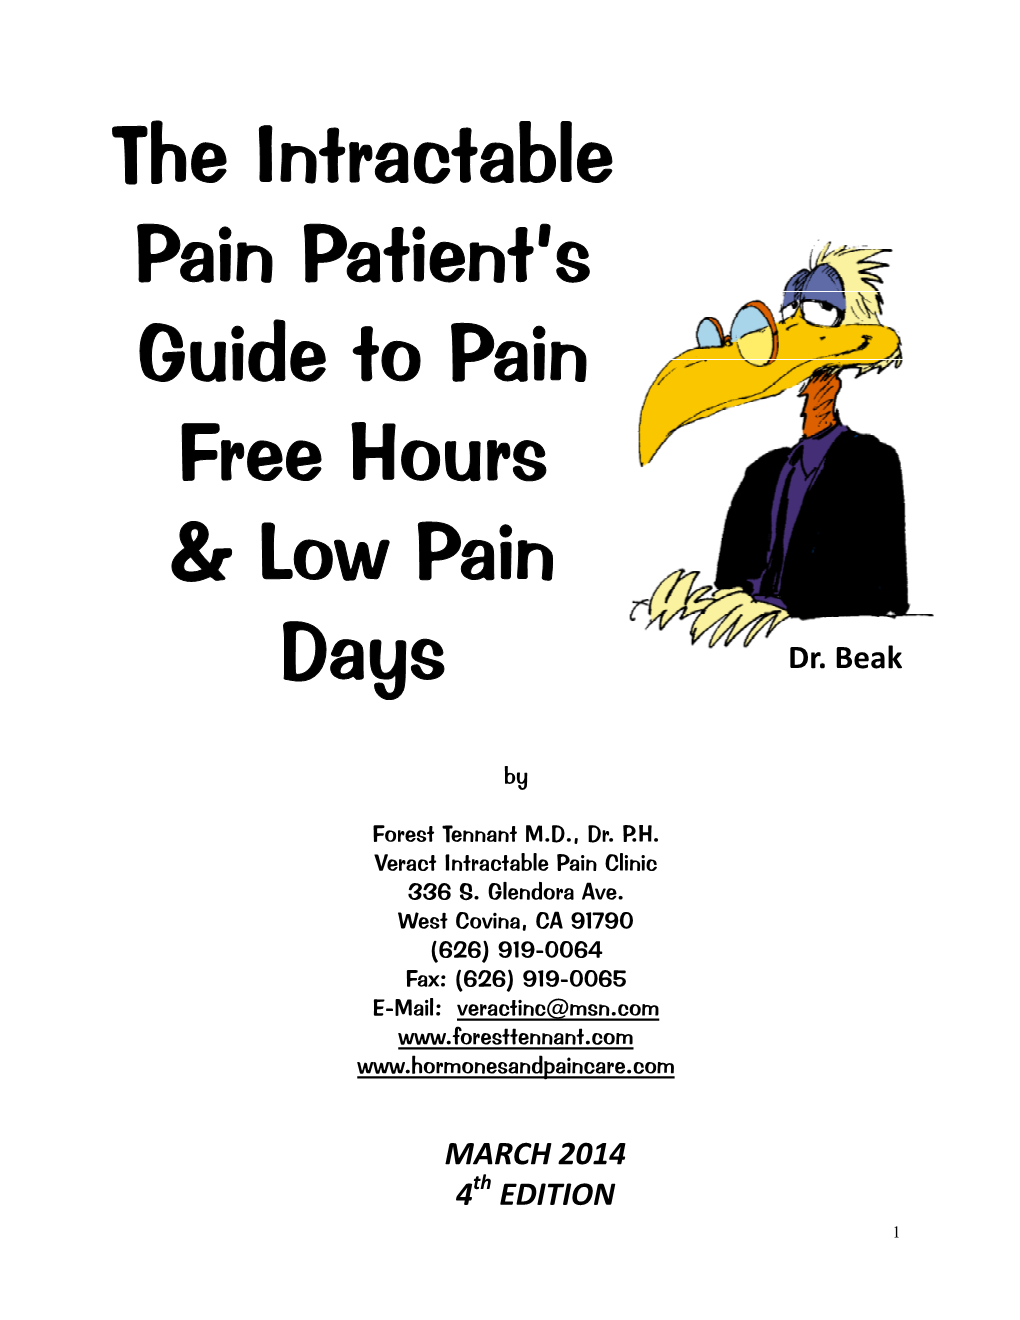 The Intractable Pain Patient's Guide to Pain Free Hours & Low Pain Days